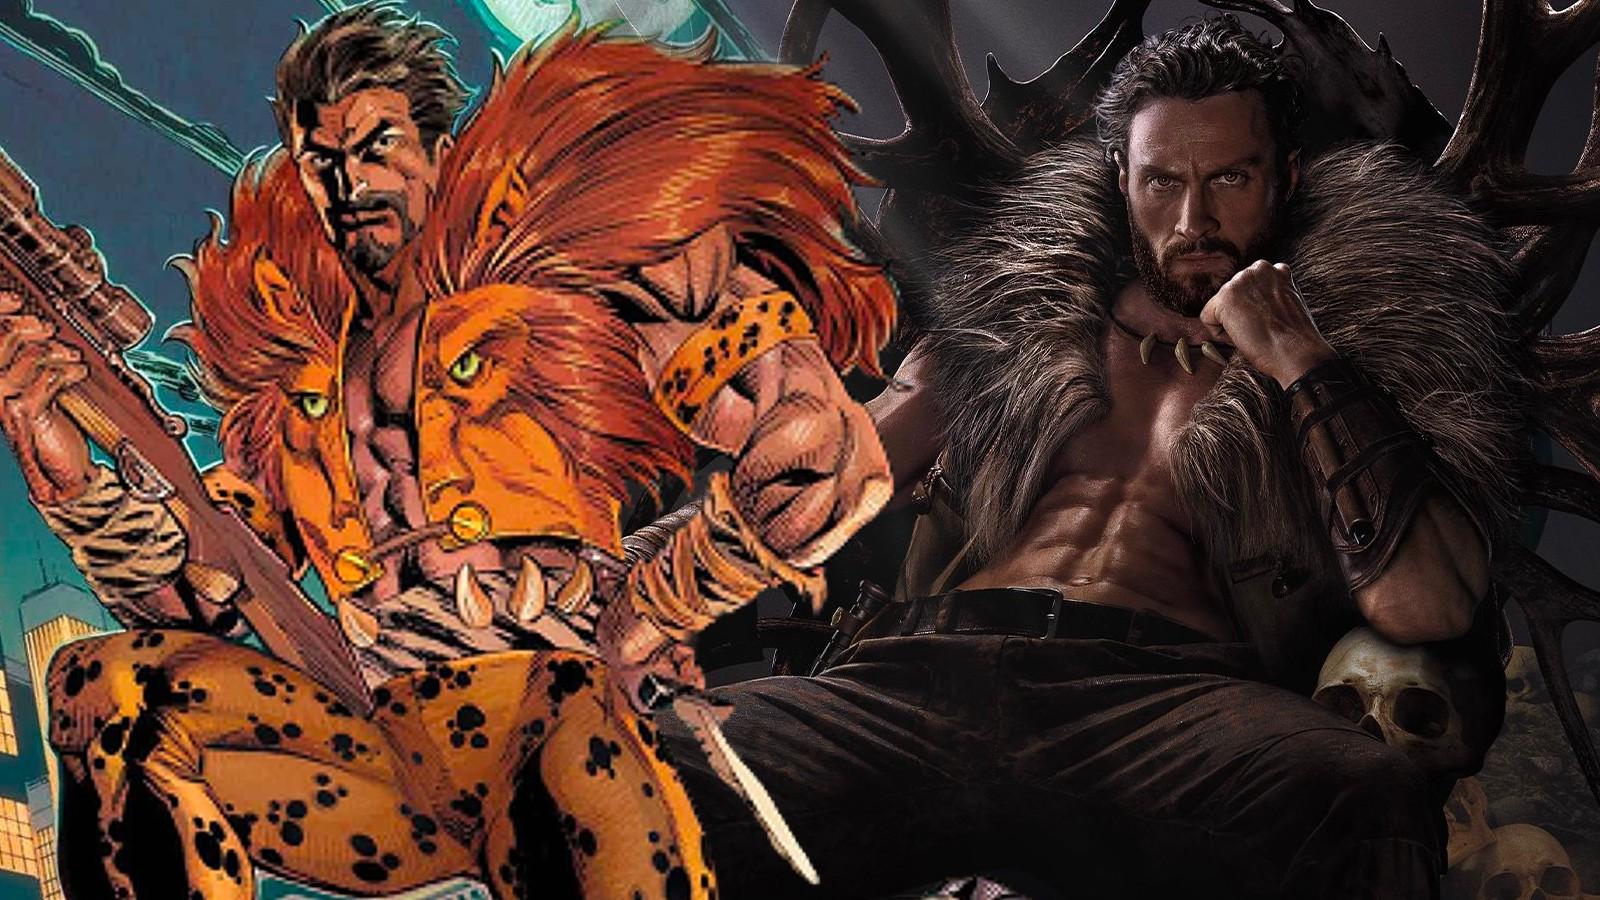 Kraven the Hunter in the comics and movie